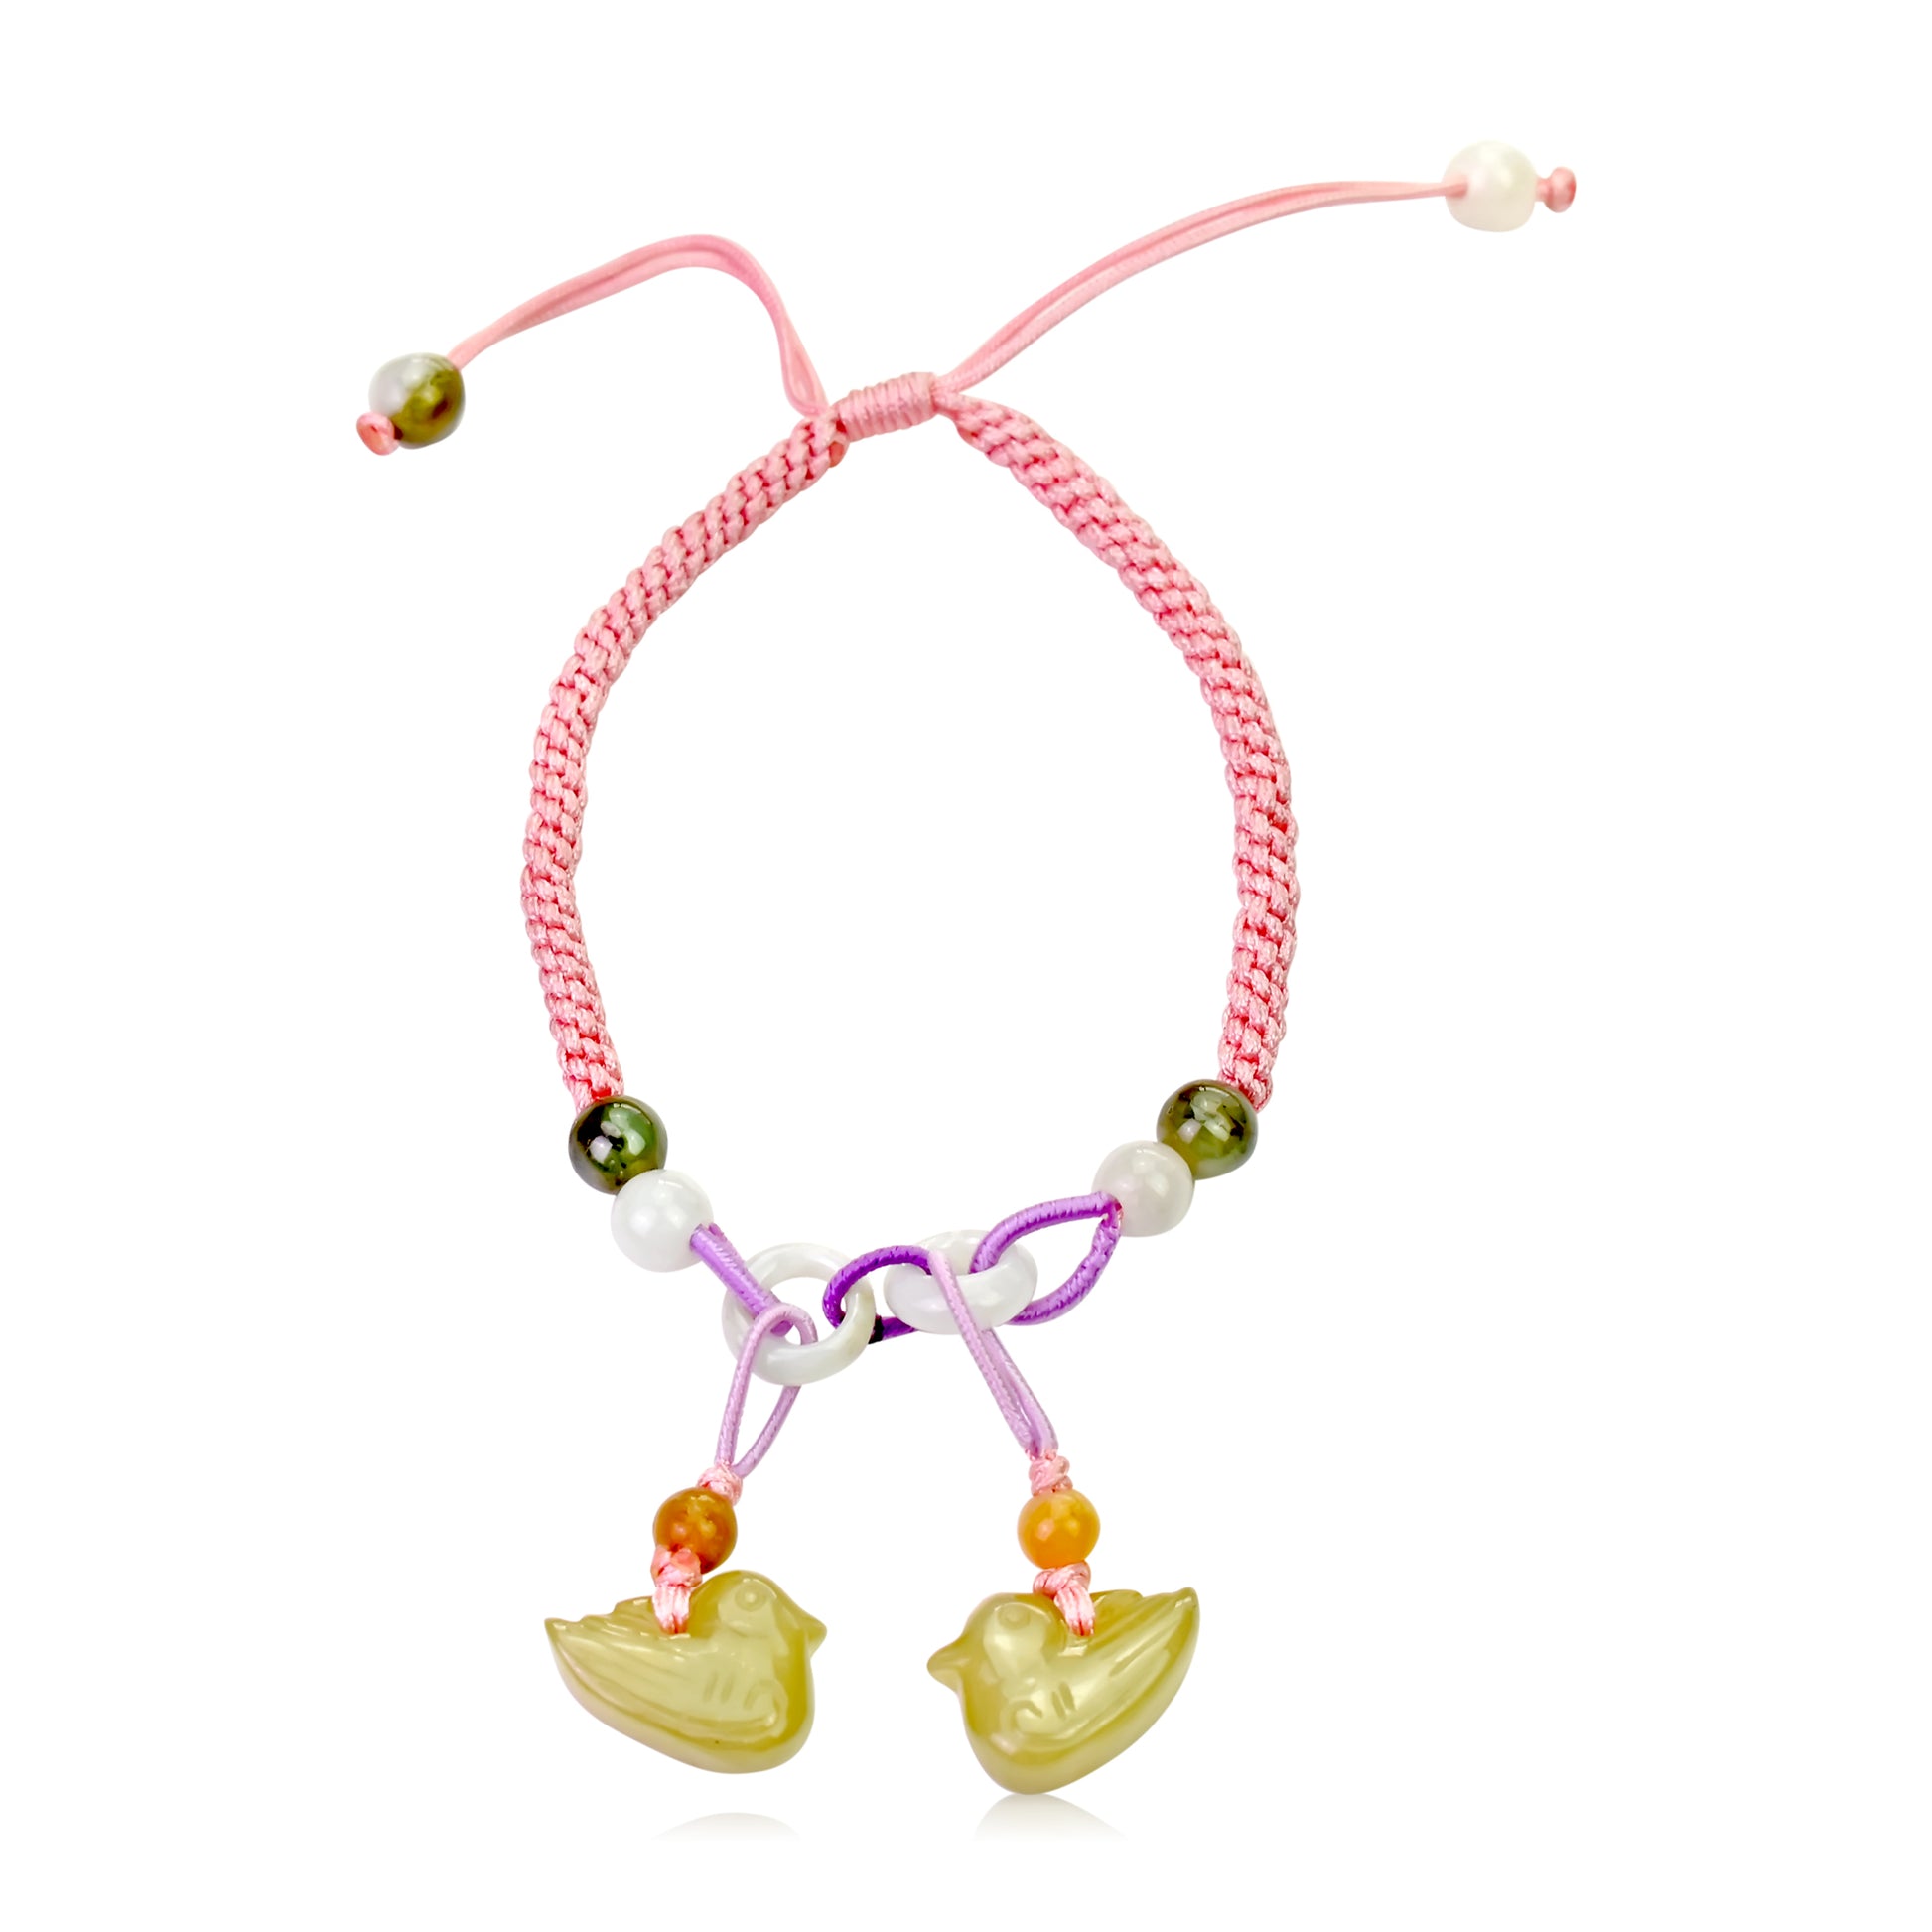 Express Your Style with a Unique Double Dove Handmade Jade Bracelet made with Pink Cord